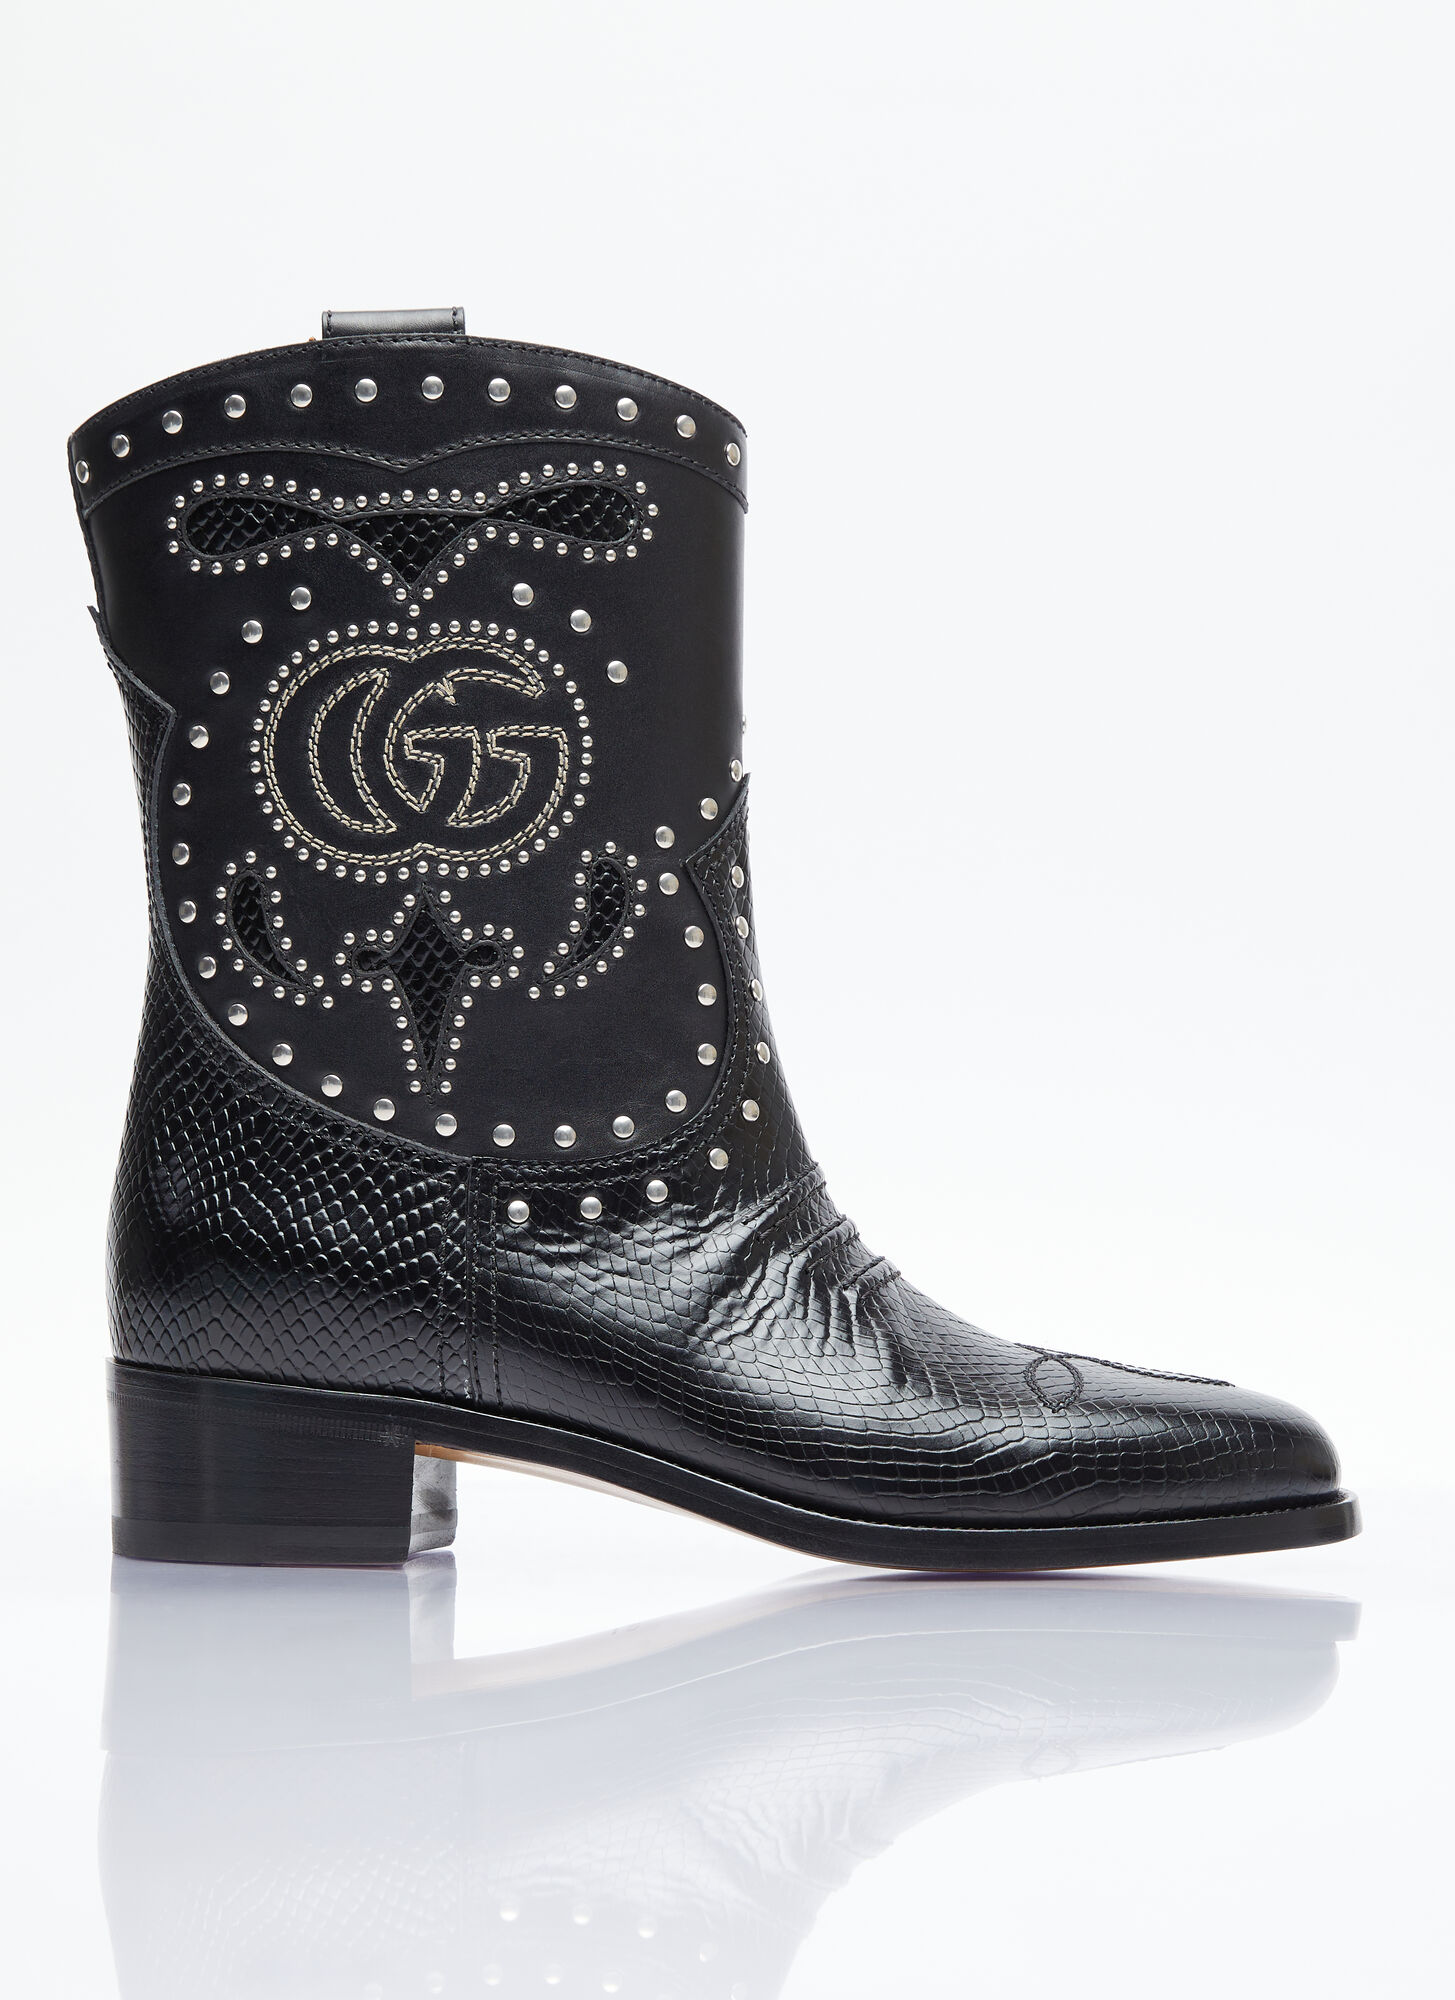 GUCCI DOUBLE G STUDDED LEATHER BOOTS